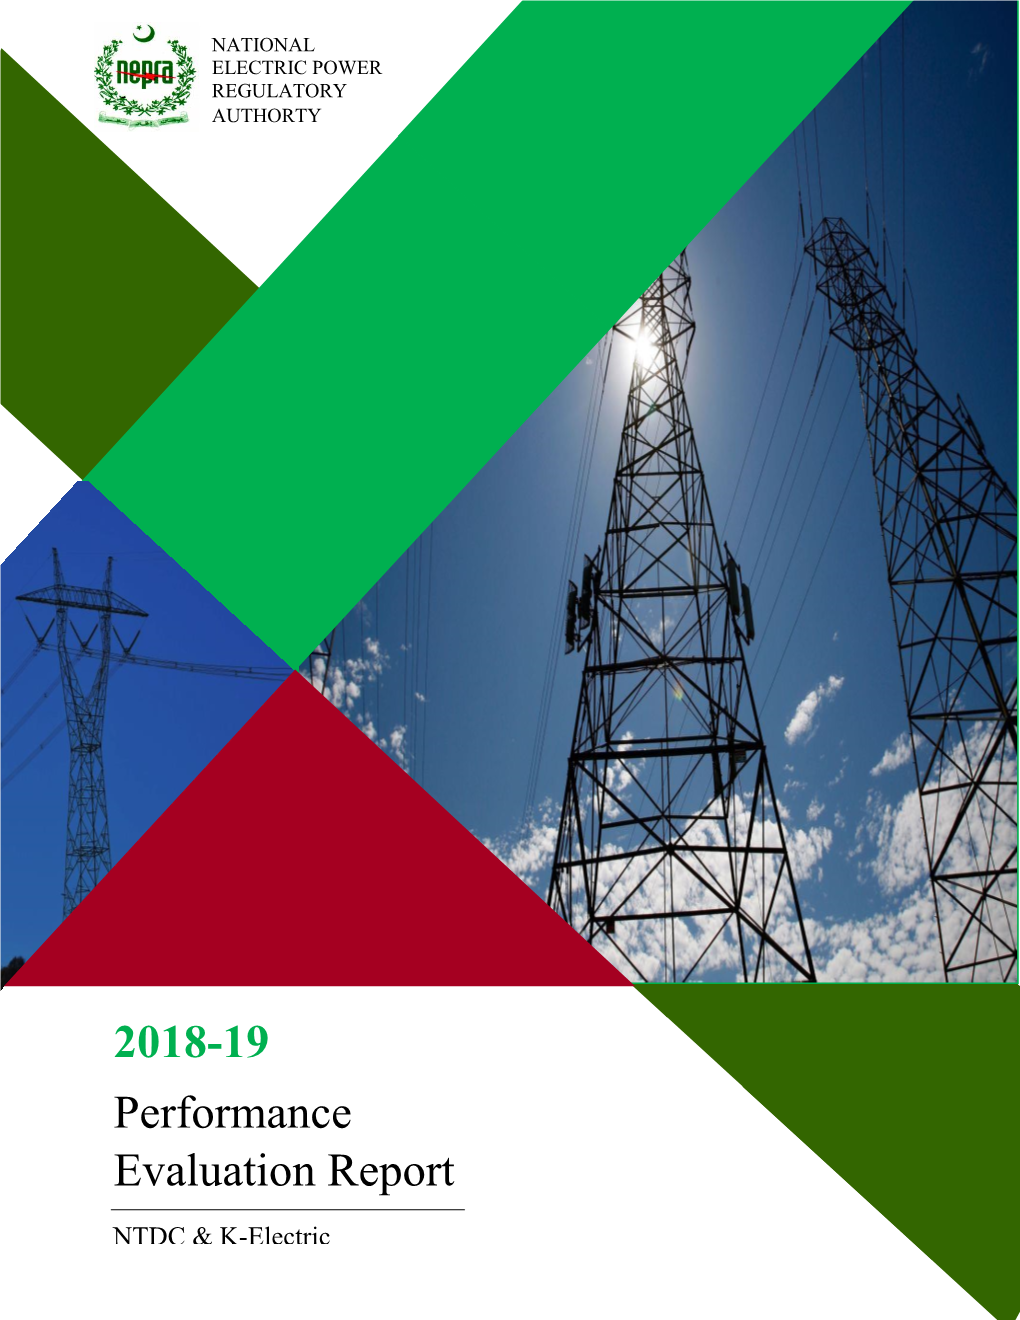 Performance Evaluation Report of NTDC & K-Electric 2018-19